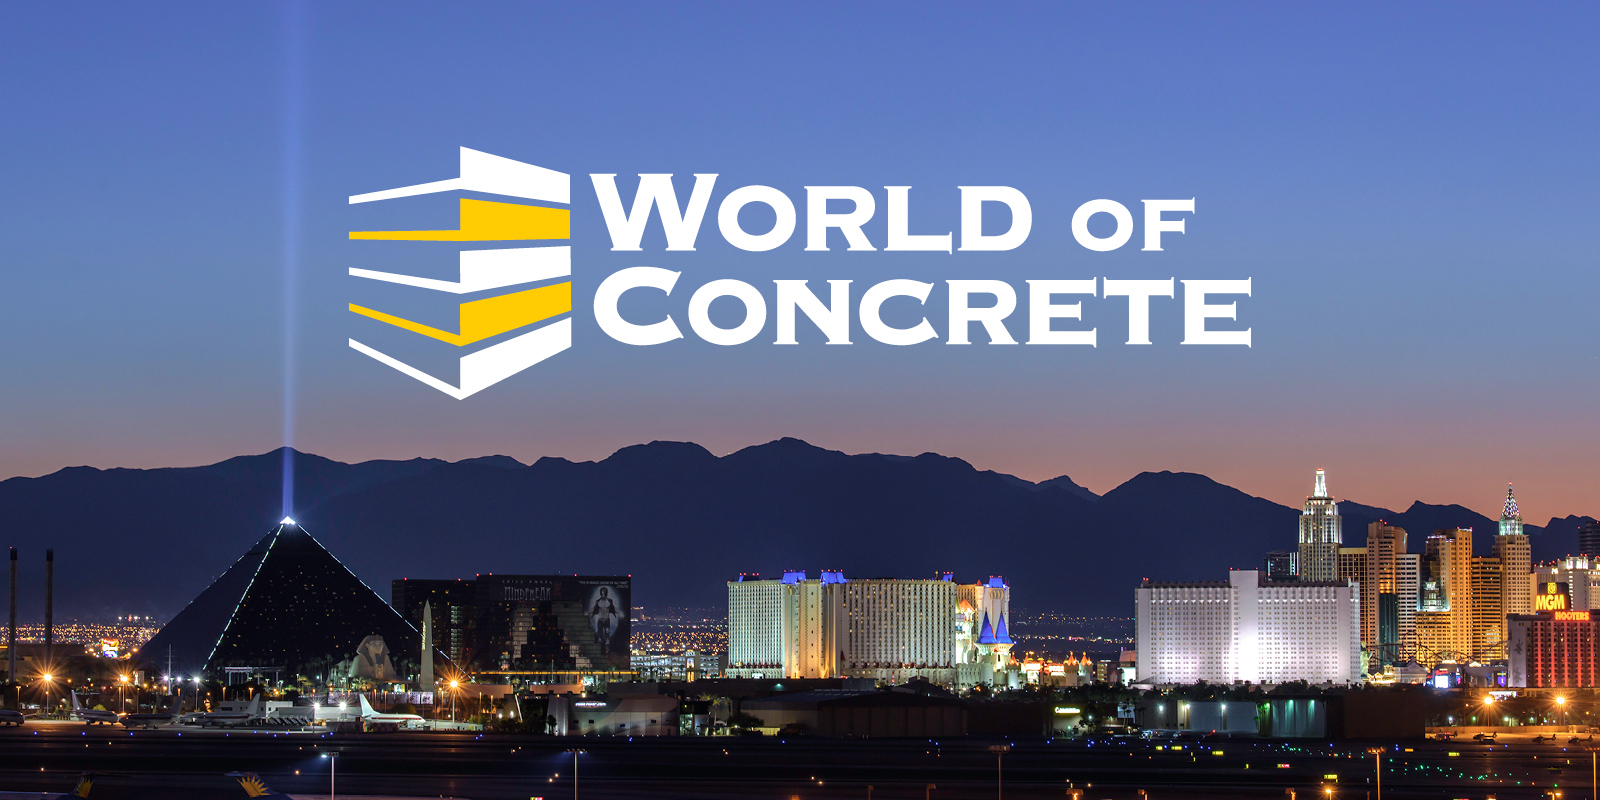 The World of Concrete logo rests against the backdrop of the Las Vegas Convention Center area.